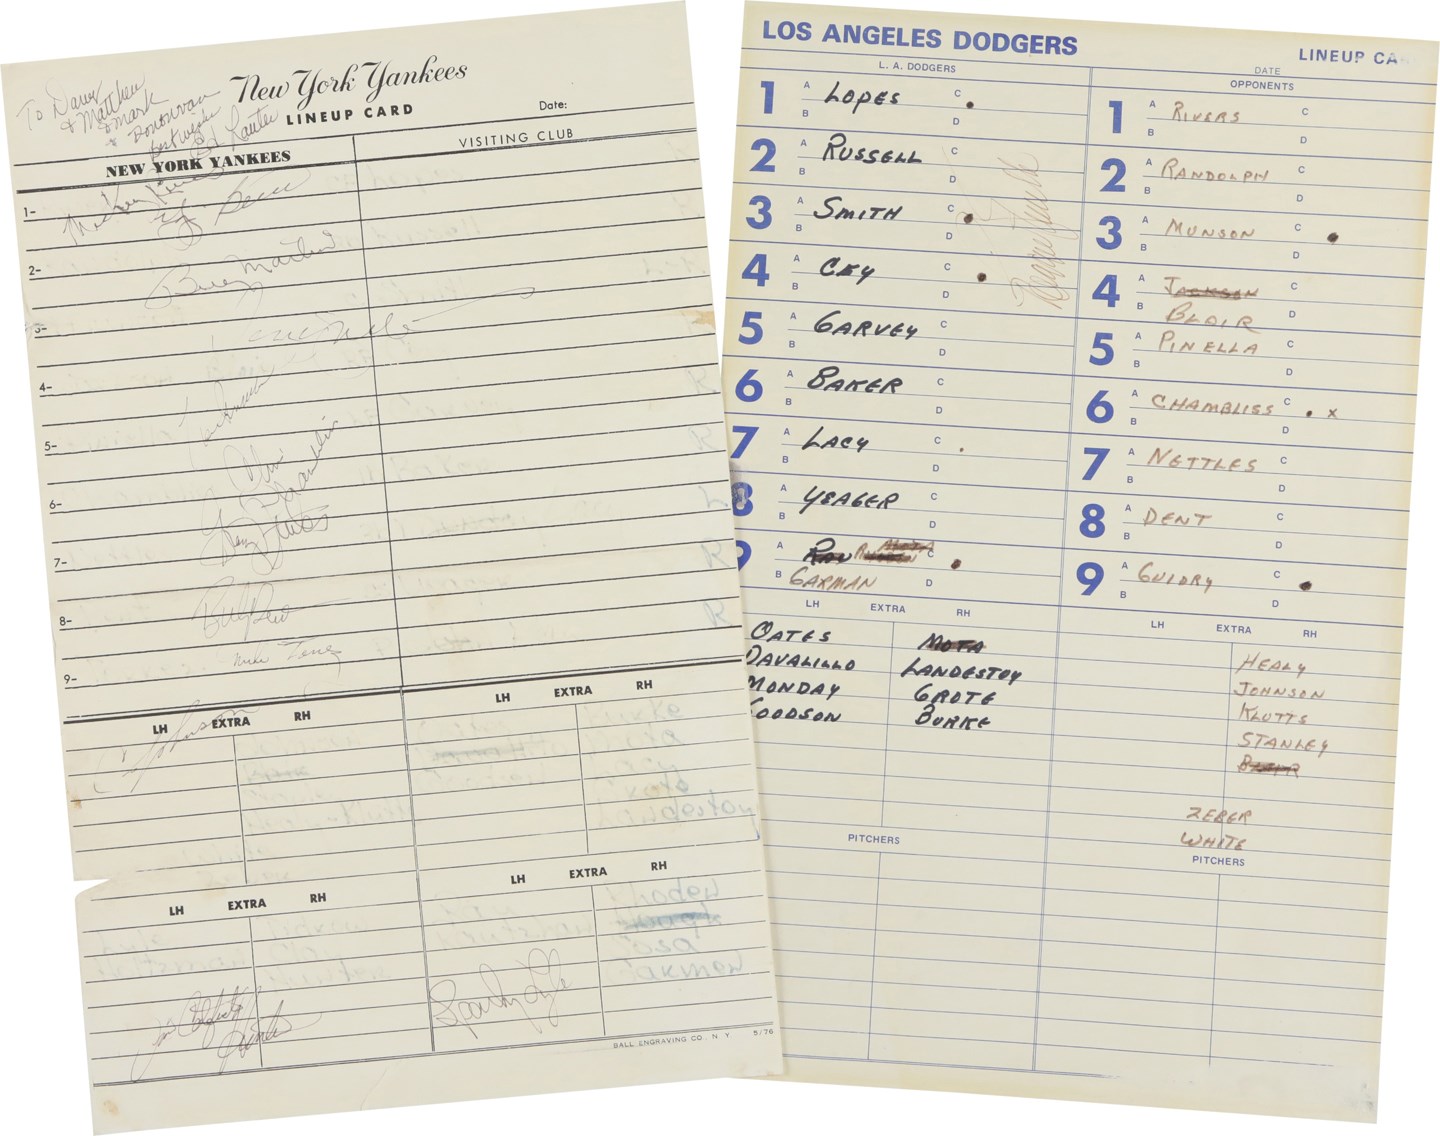 Baseball Memorabilia - NY Yankees & LA Dodgers Original 1977 World Series Dugout Lineup Cards - Games 3 & 4 - Signed by Numerous Yankees Players (PSA)